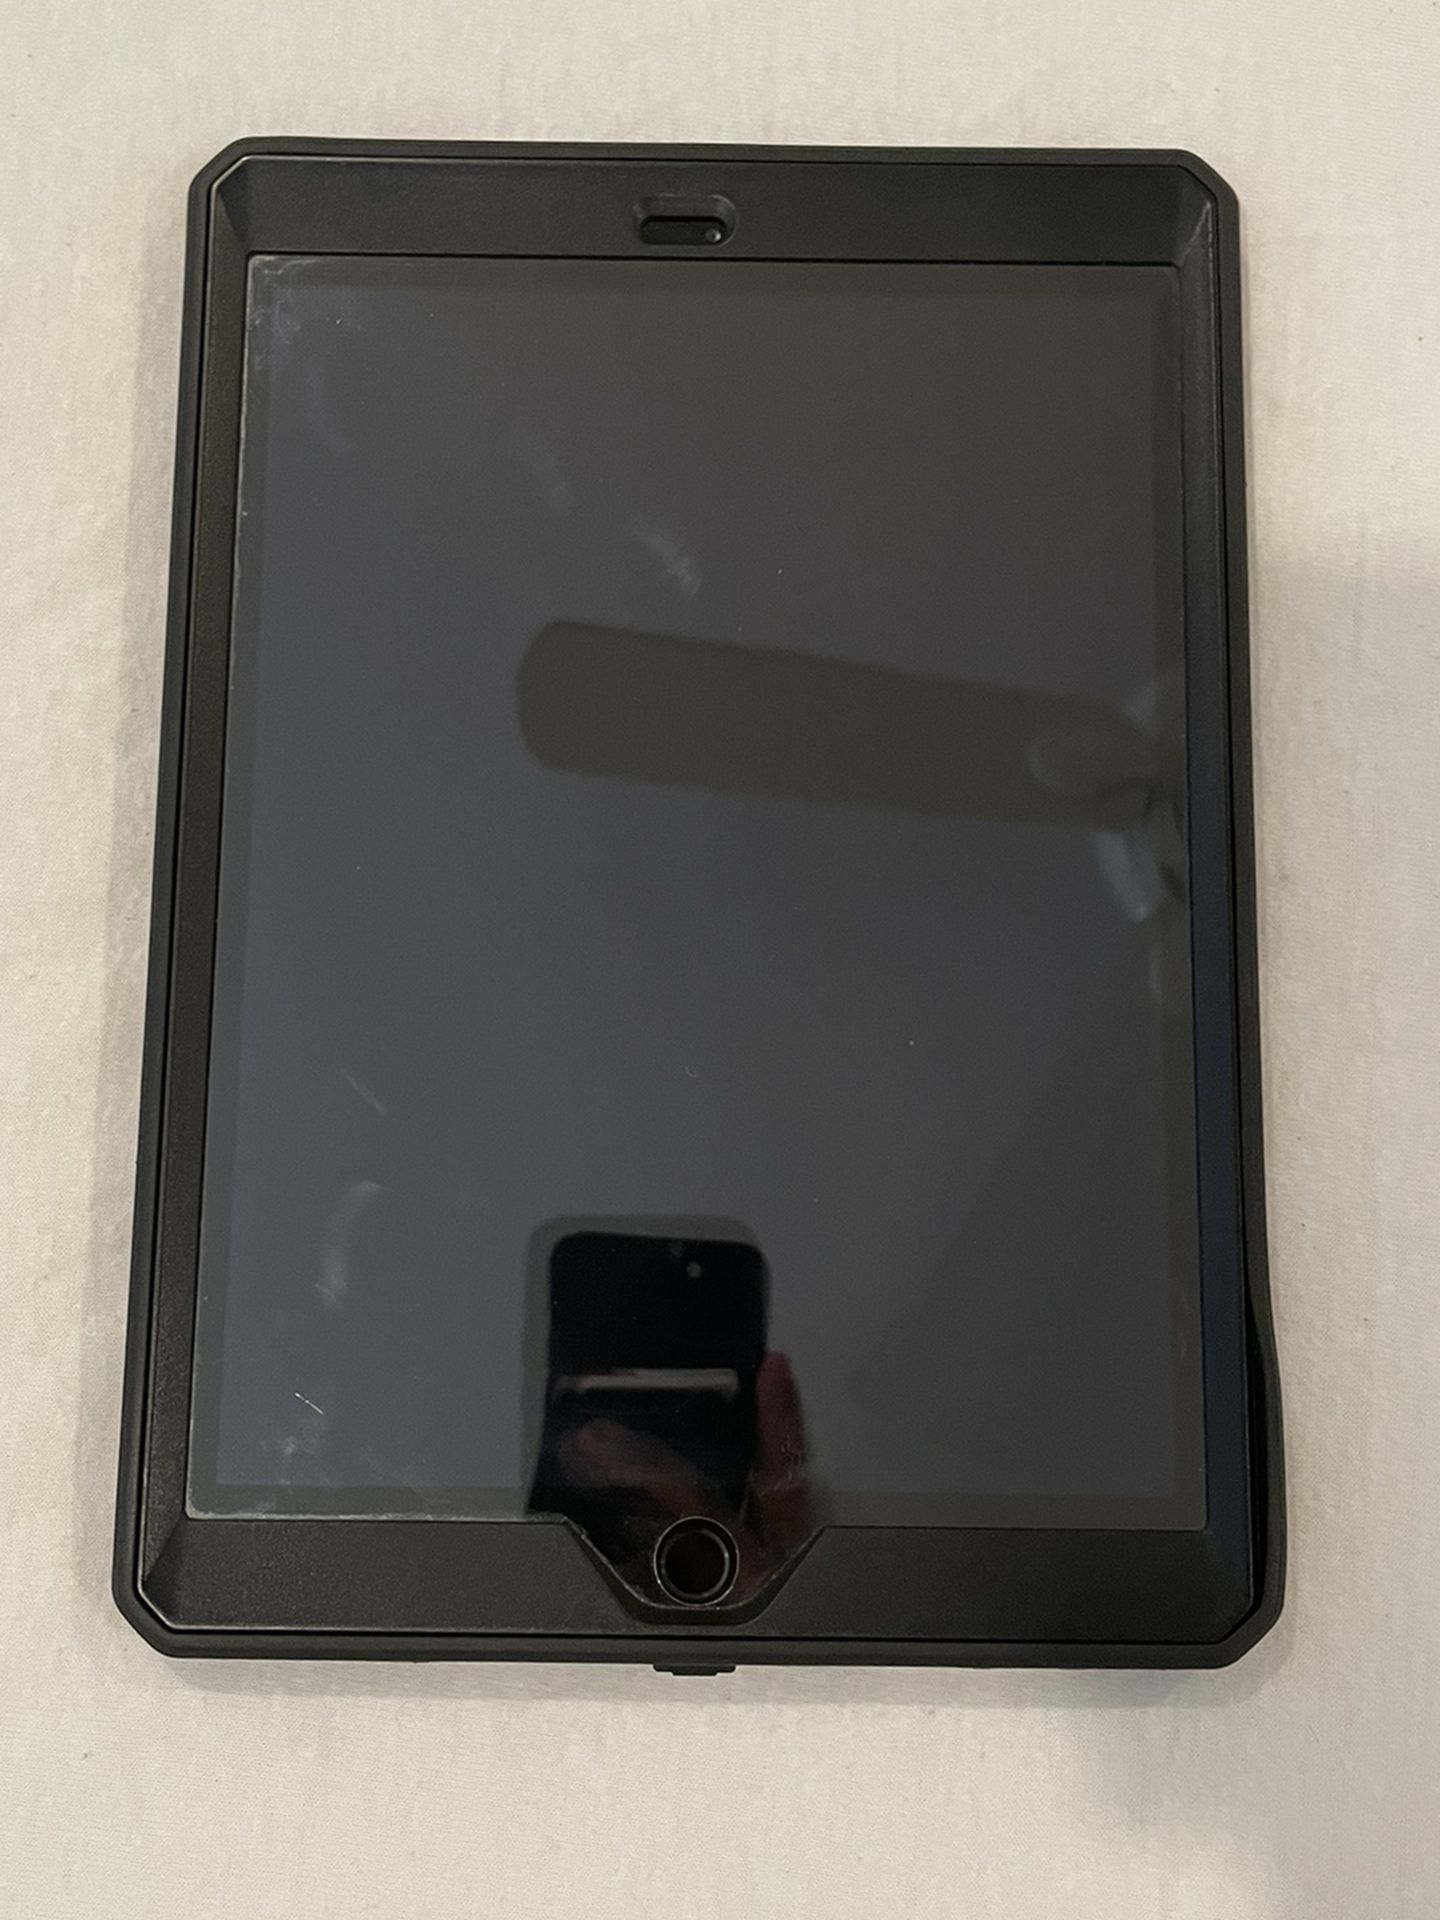 iPad Model A1823 (5th Generation) WiFi + Cellular For Sale!